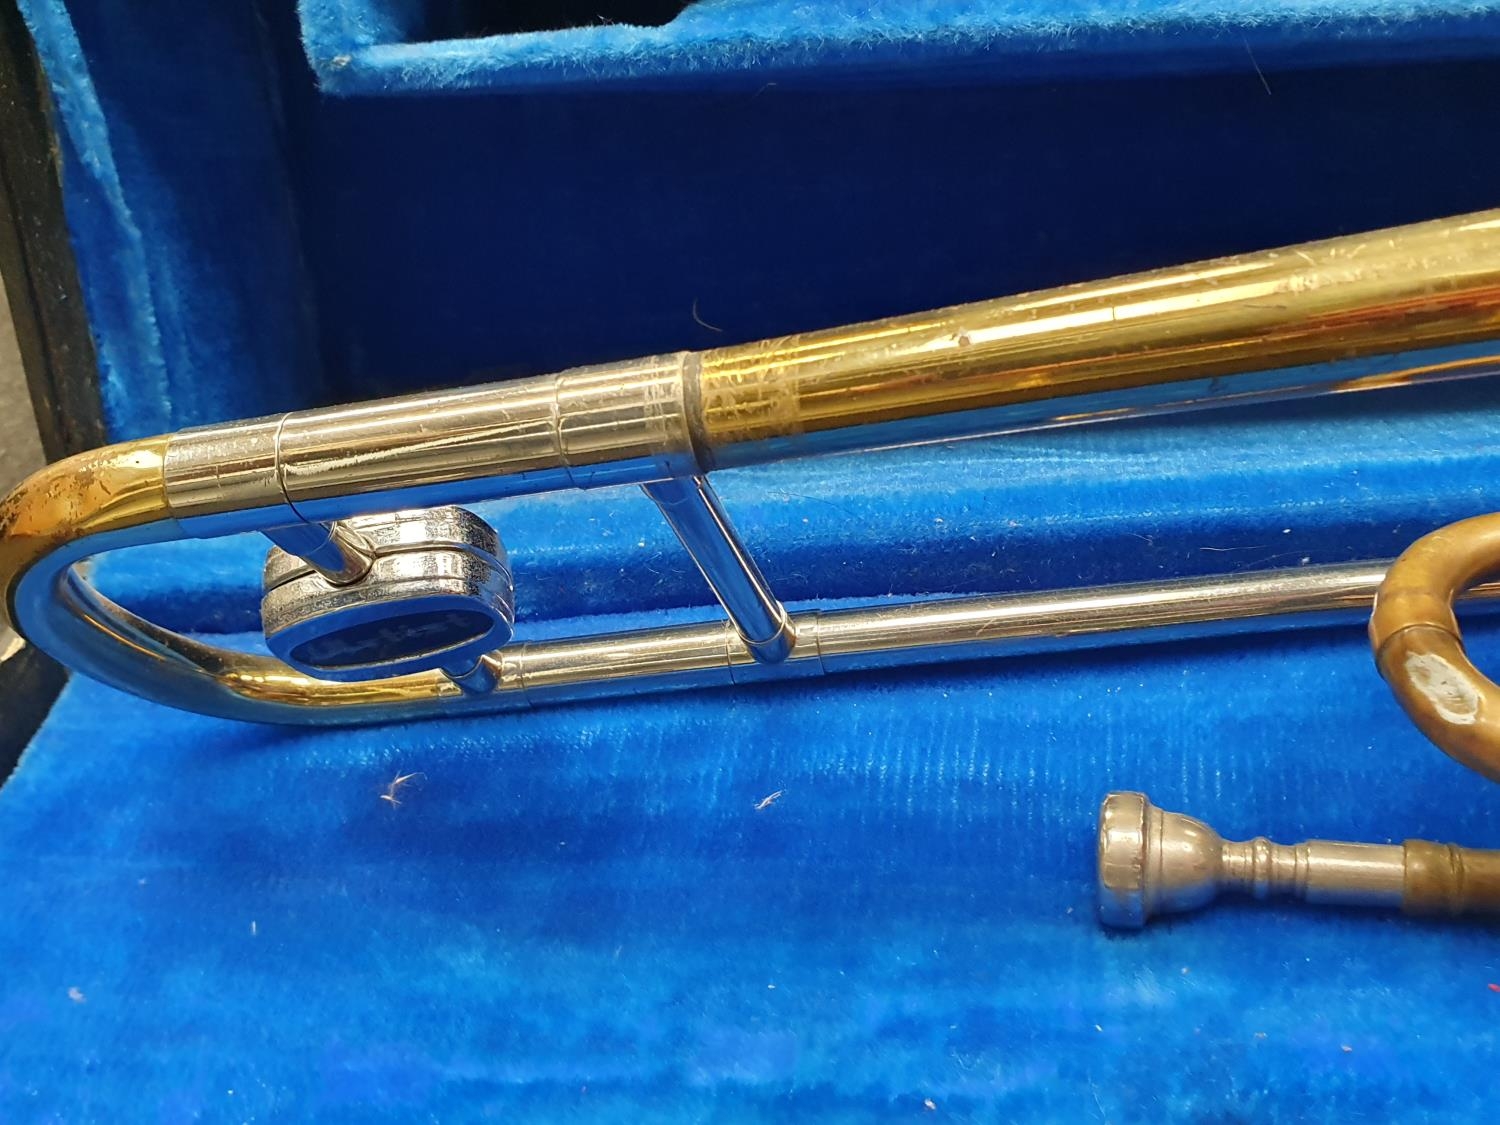 Artist trombone in case together with a trumpet. - Image 6 of 6